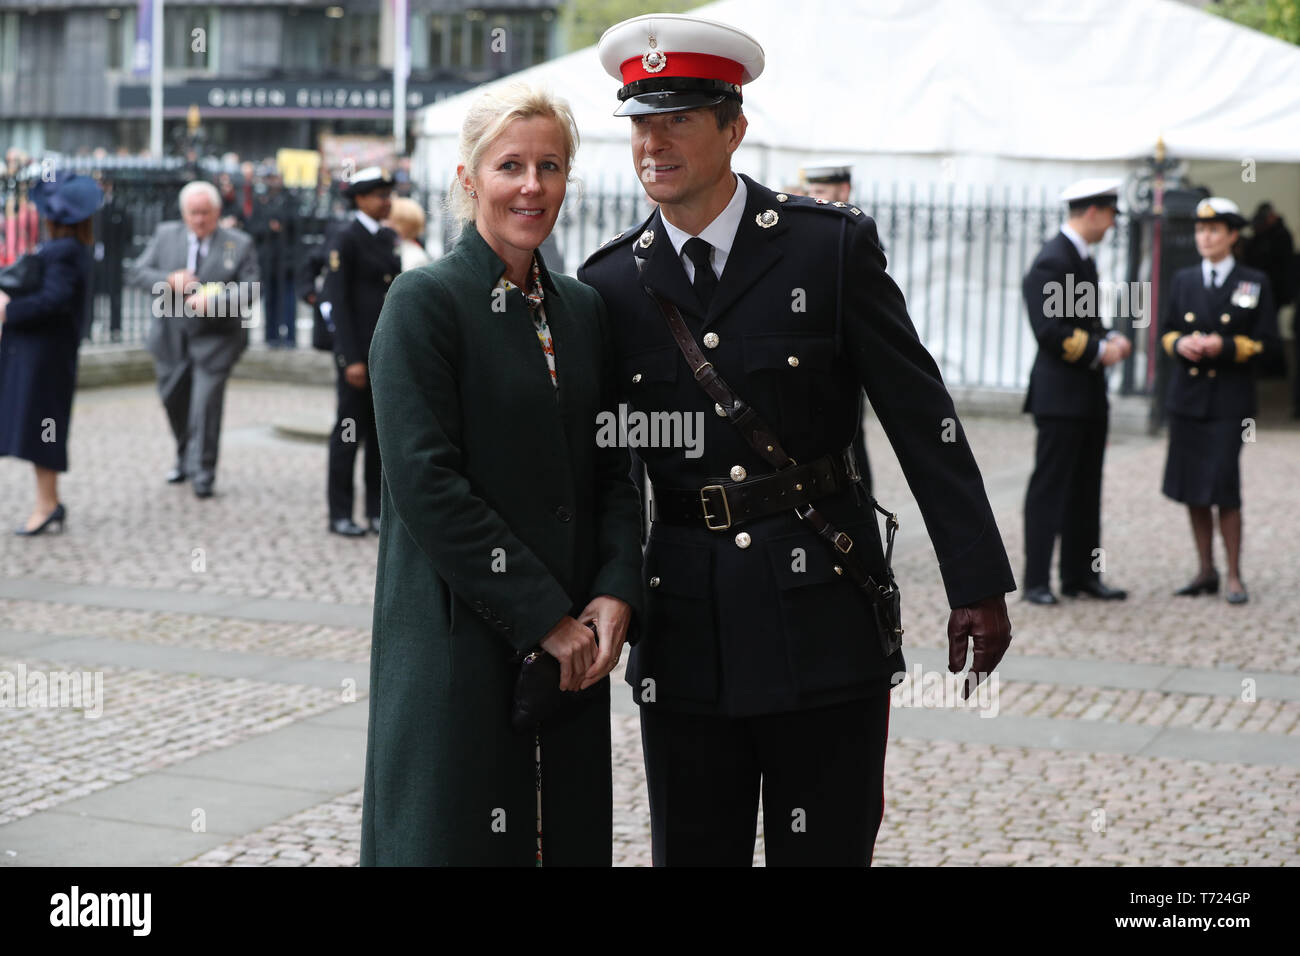 Bear Grylls arrives to attend a service at Westminster Abbey to recognise fifty years of continuous deterrent at sea. The Duke of Cambridge is also attending in his capacity as Commodore-in-Chief of the Submarine Service. Stock Photo